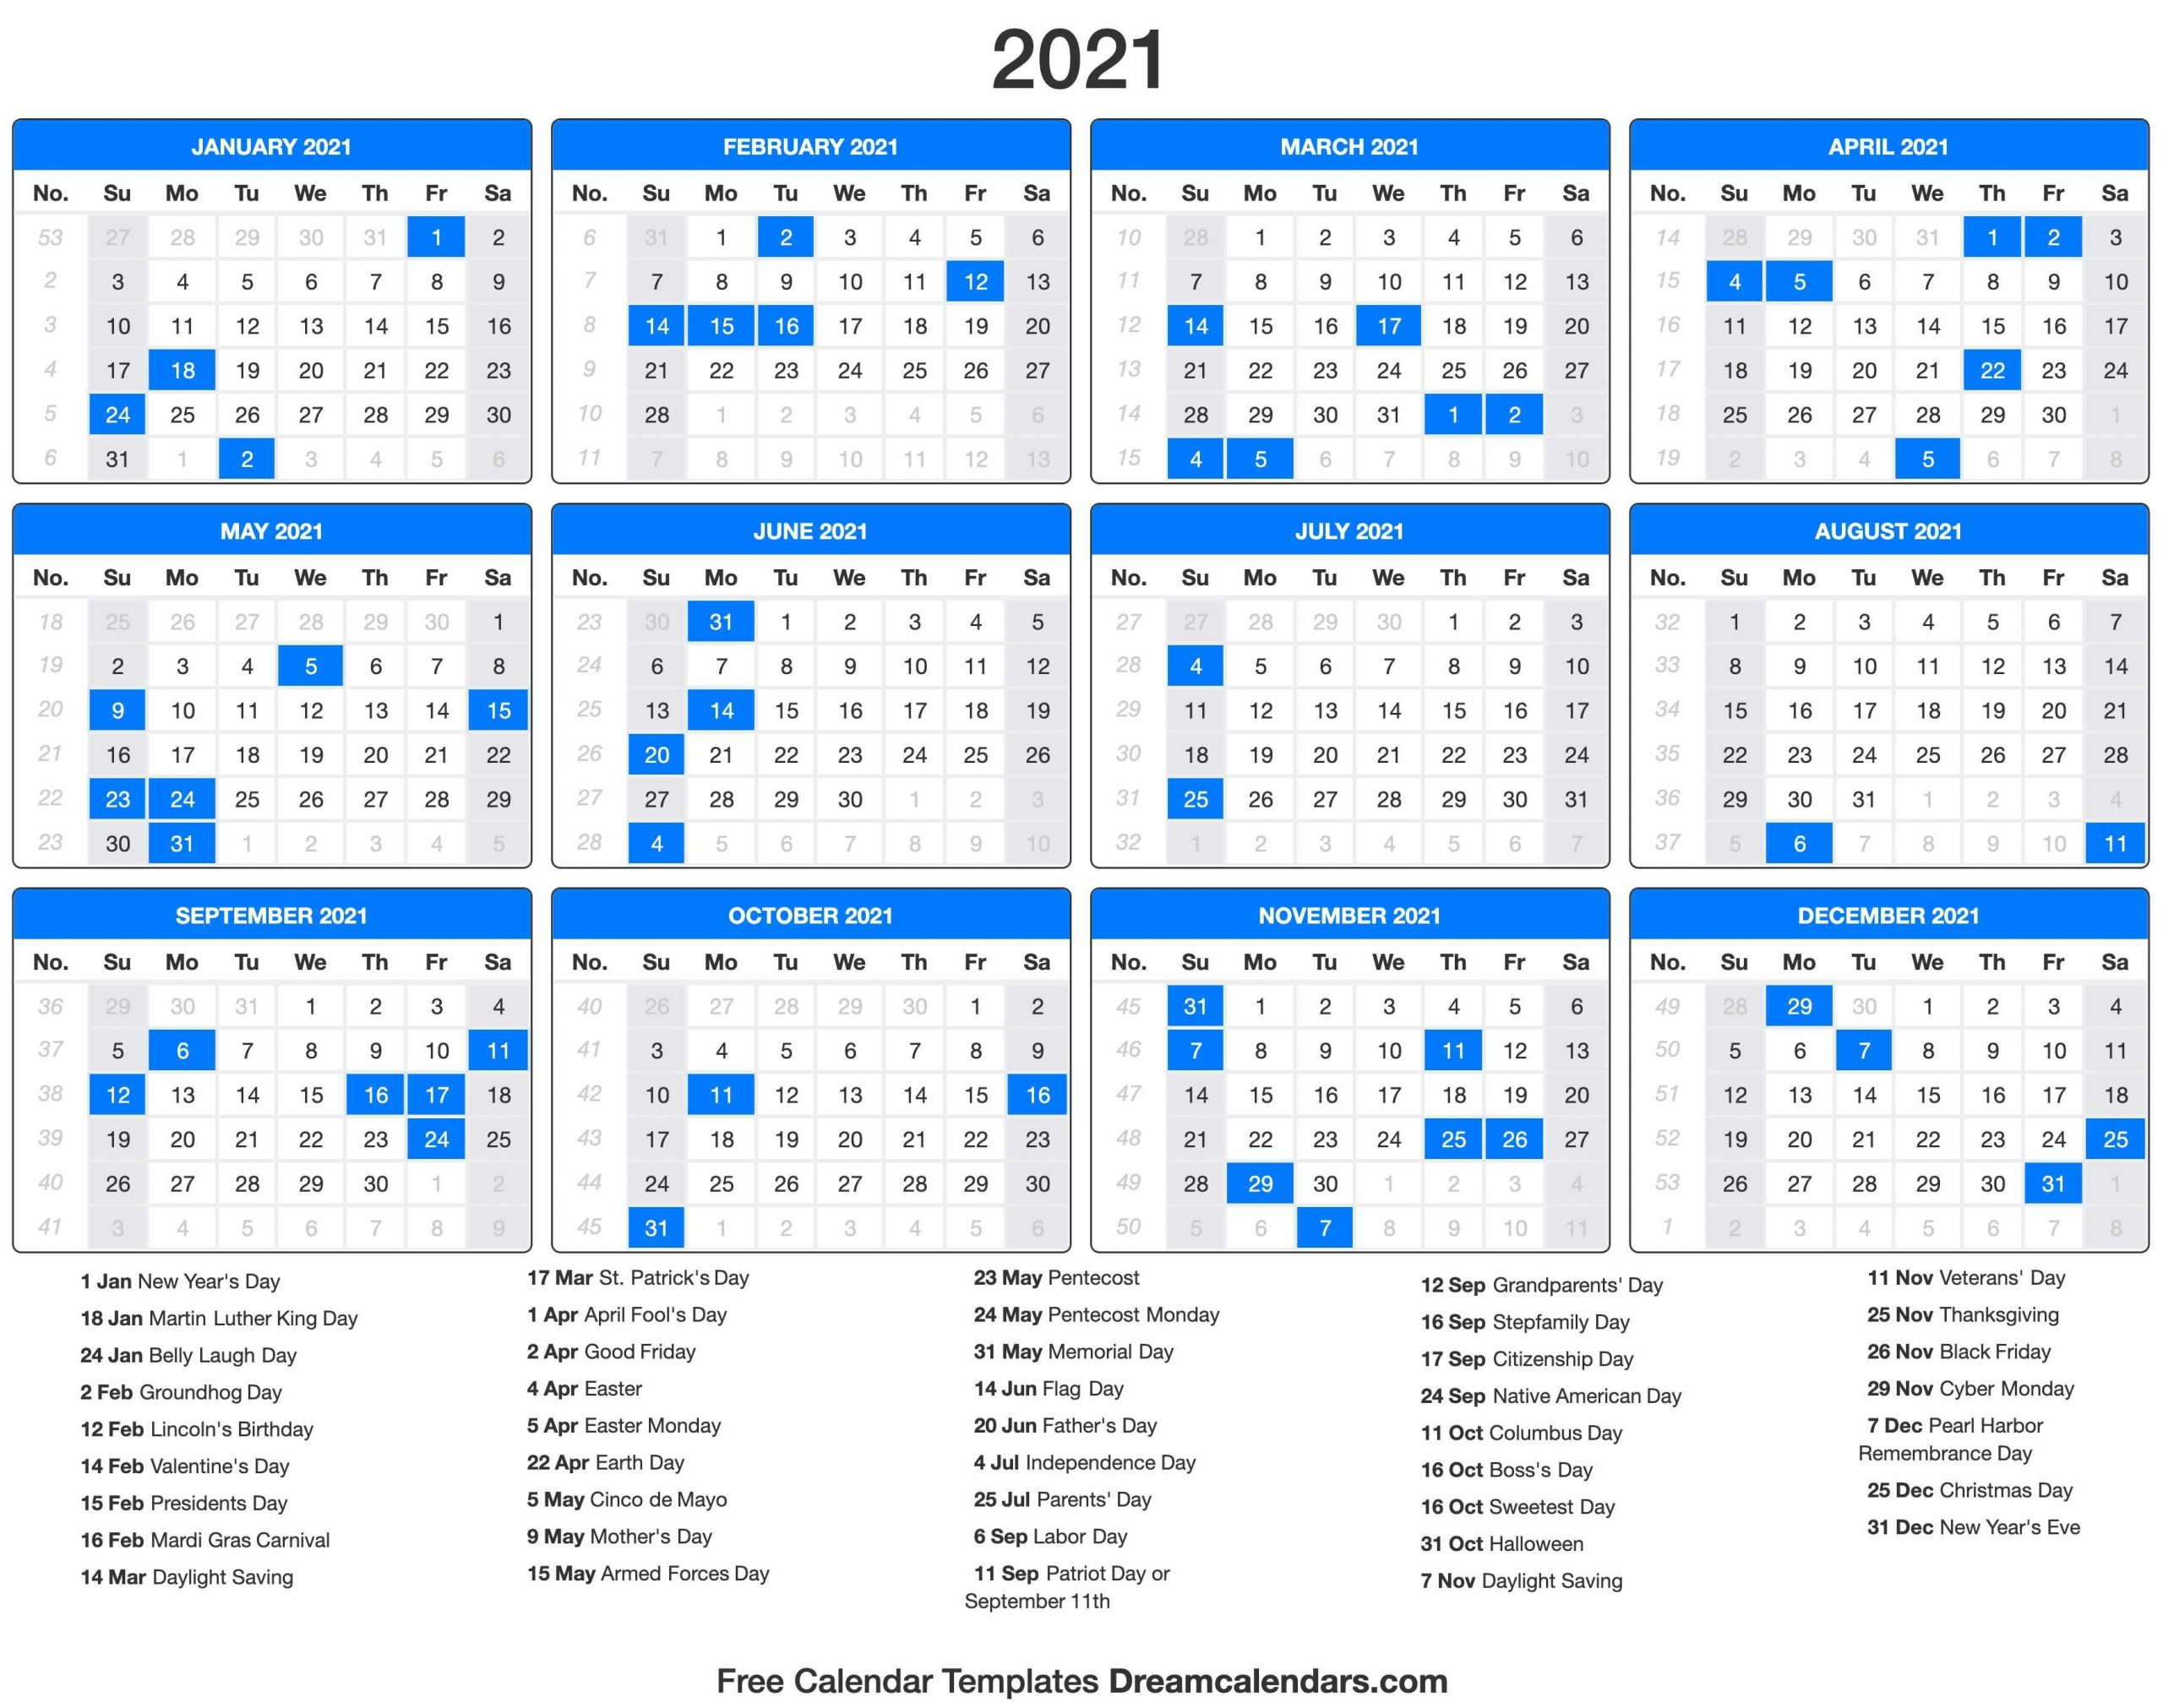 Holiday Calendar 2021: Vacation Closed! These Are Special